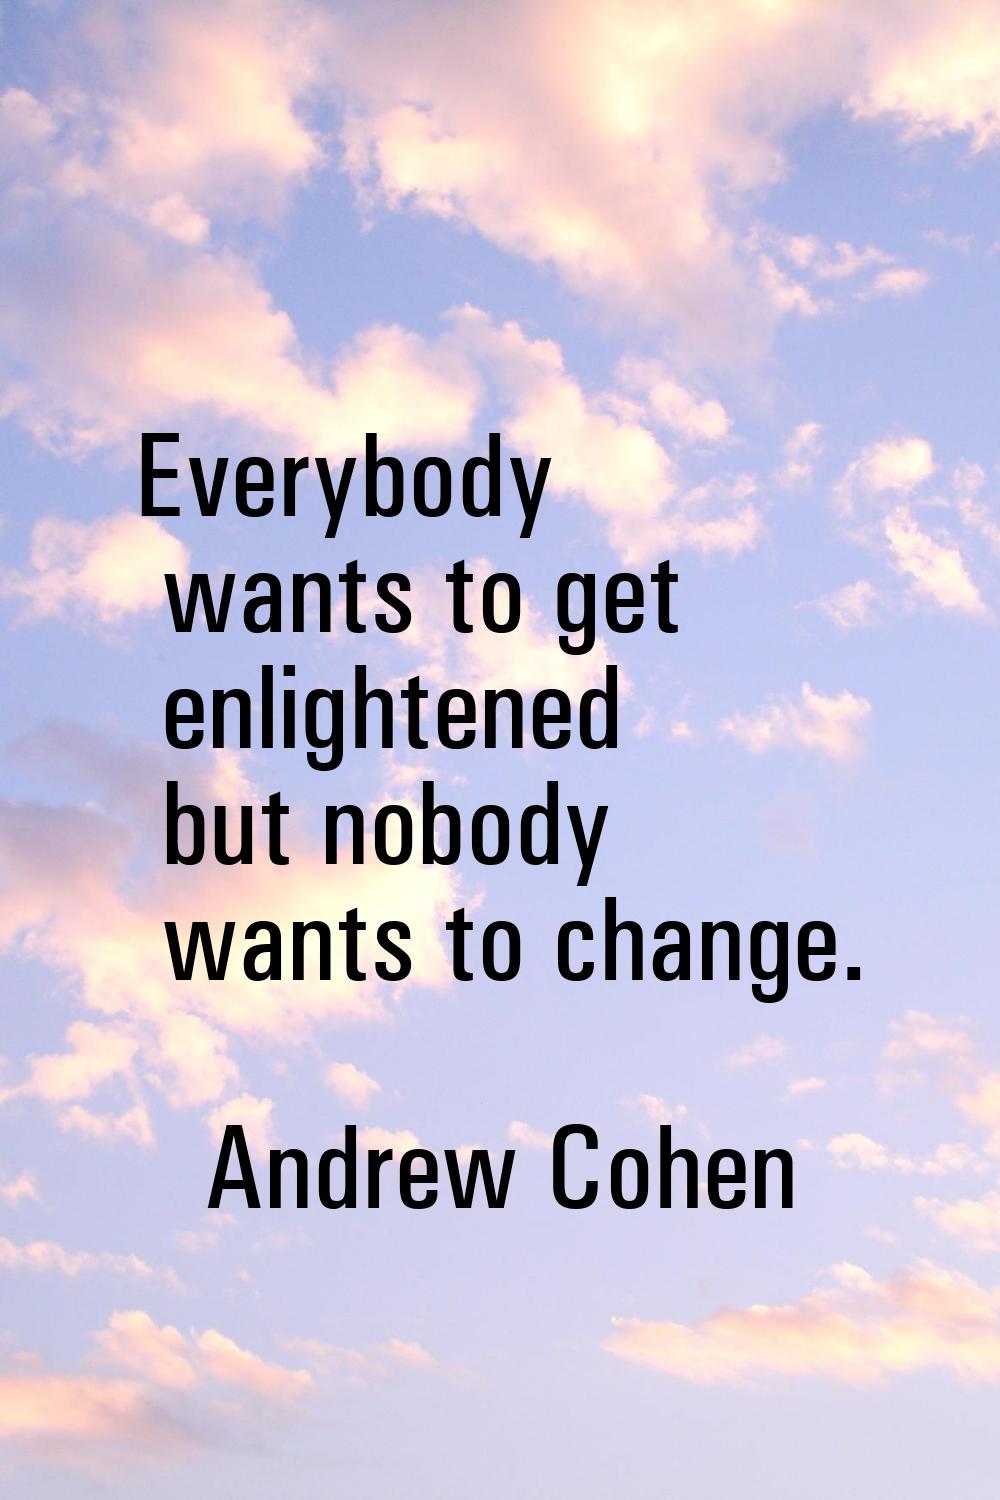 Everybody wants to get enlightened but nobody wants to change.